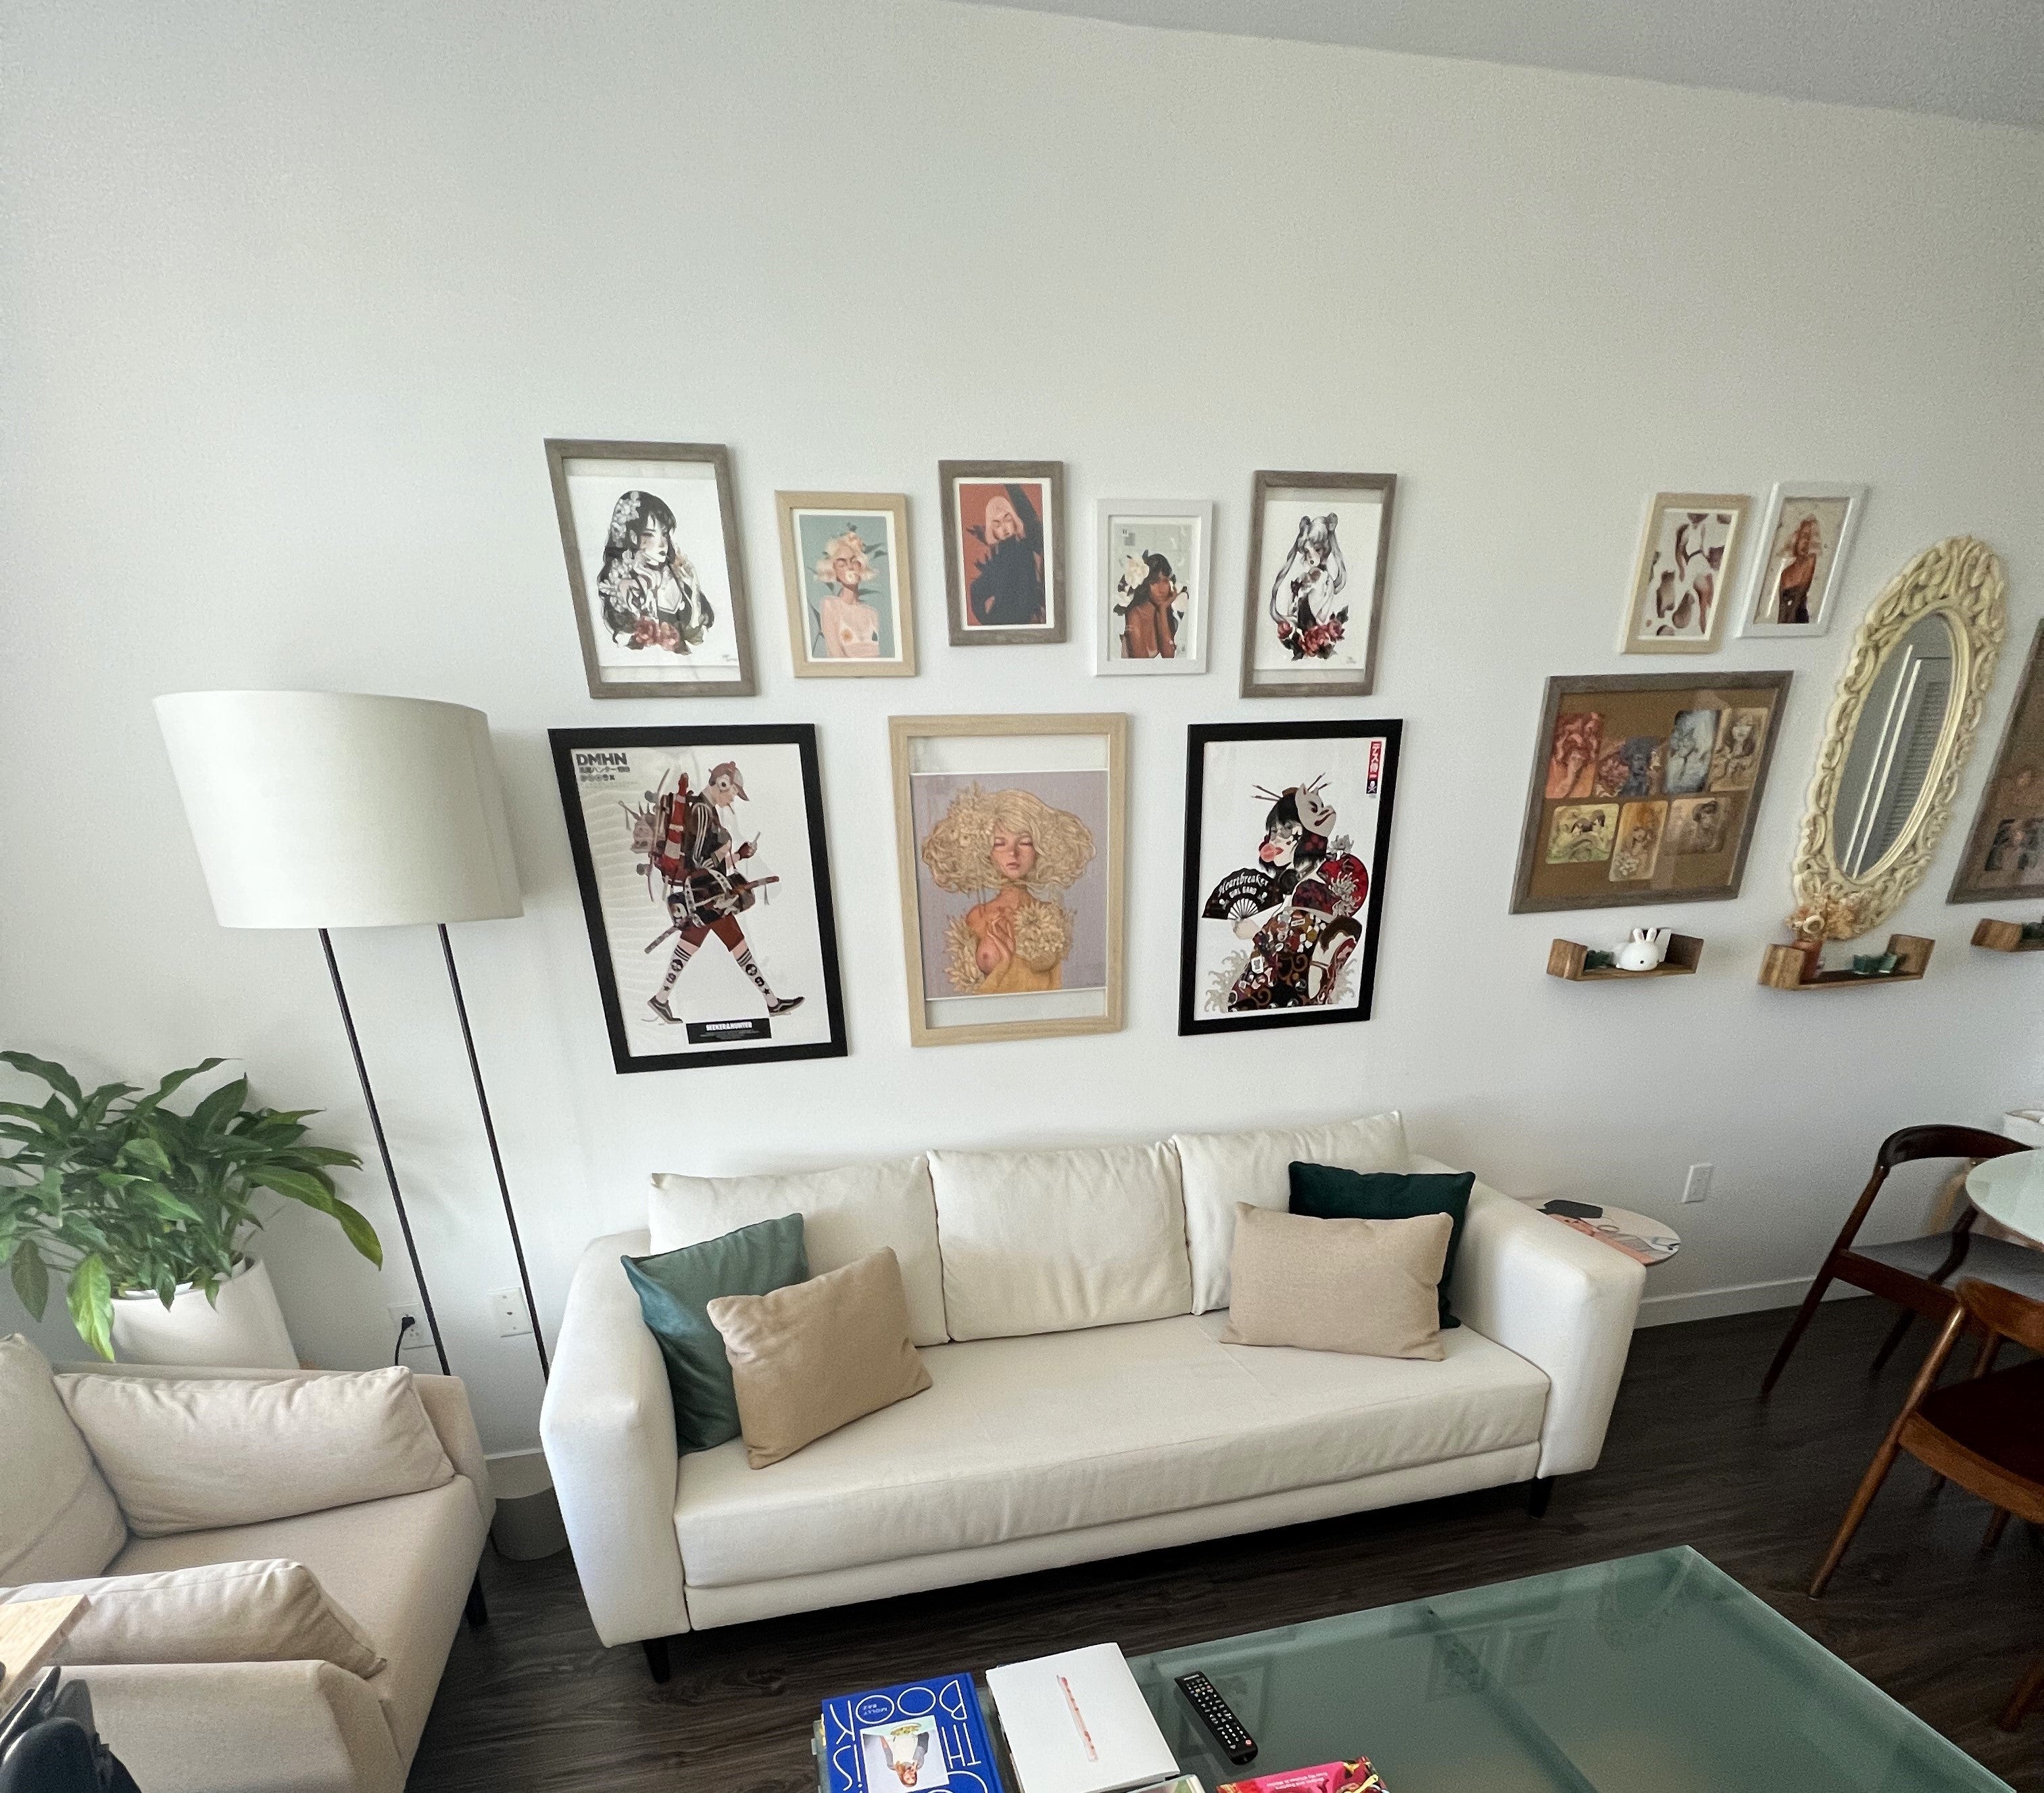 Living Room Inspo: Creating a Gallery Wall in 6 Simple Steps